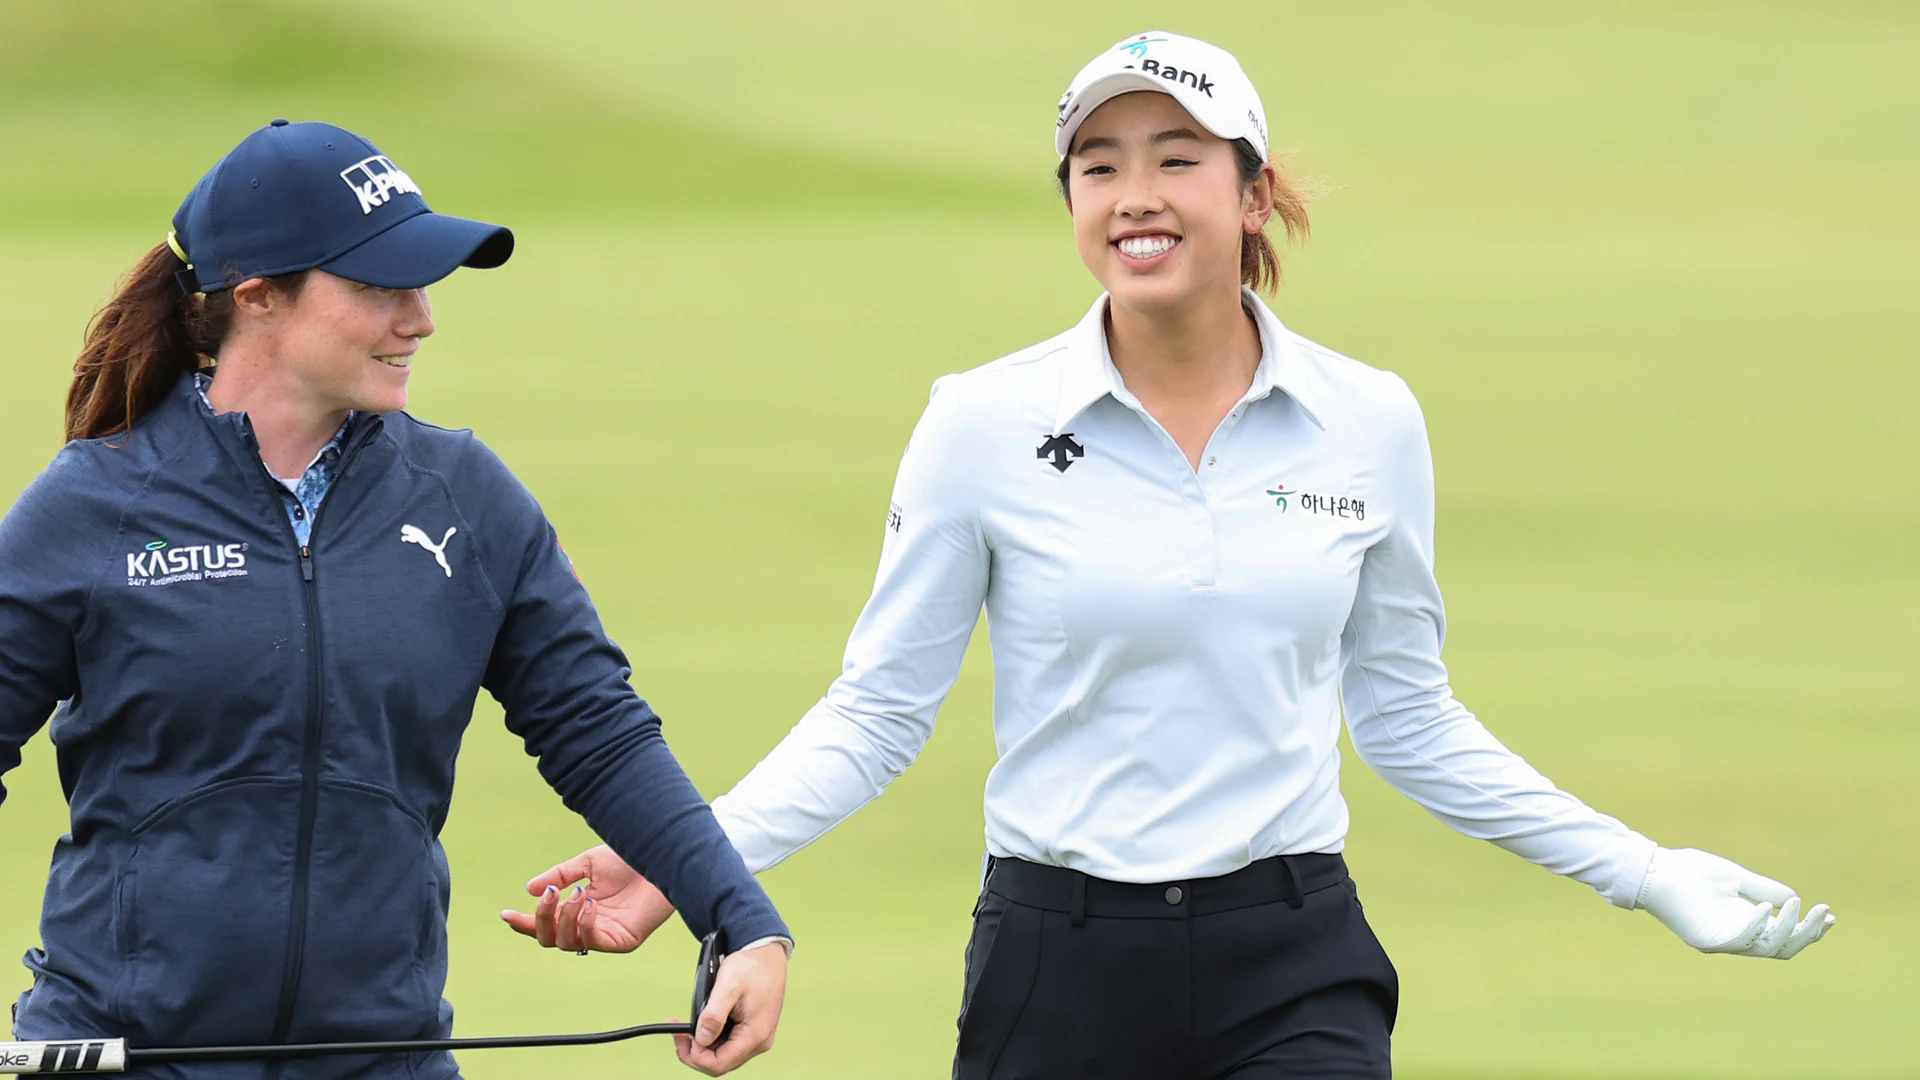 Several Solheim Cup hopefuls at Women’s Open making best of last chance to qualify